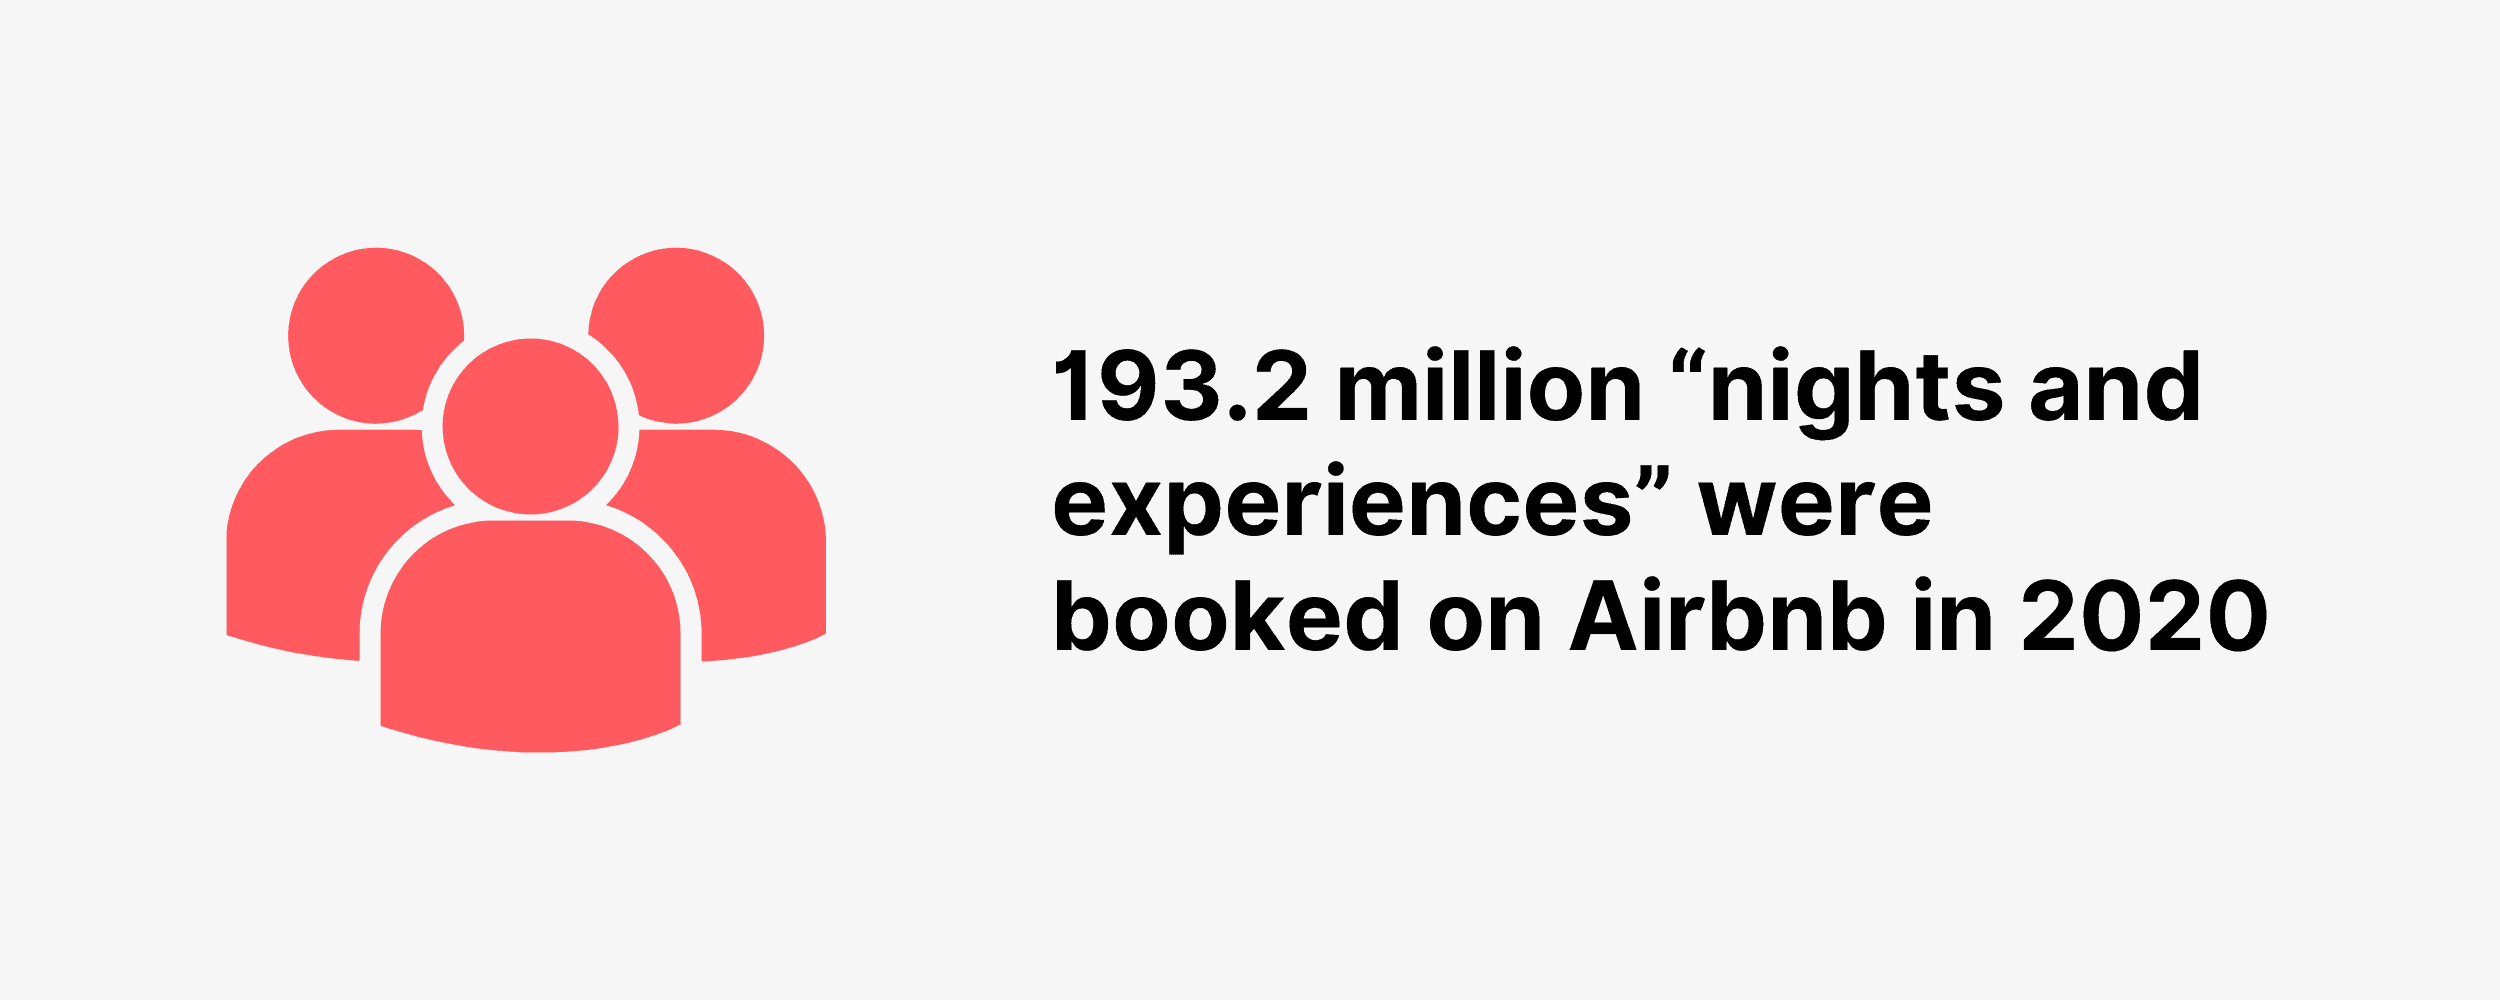 193.2 million “nights and experiences” were booked on Airbnb in 2020